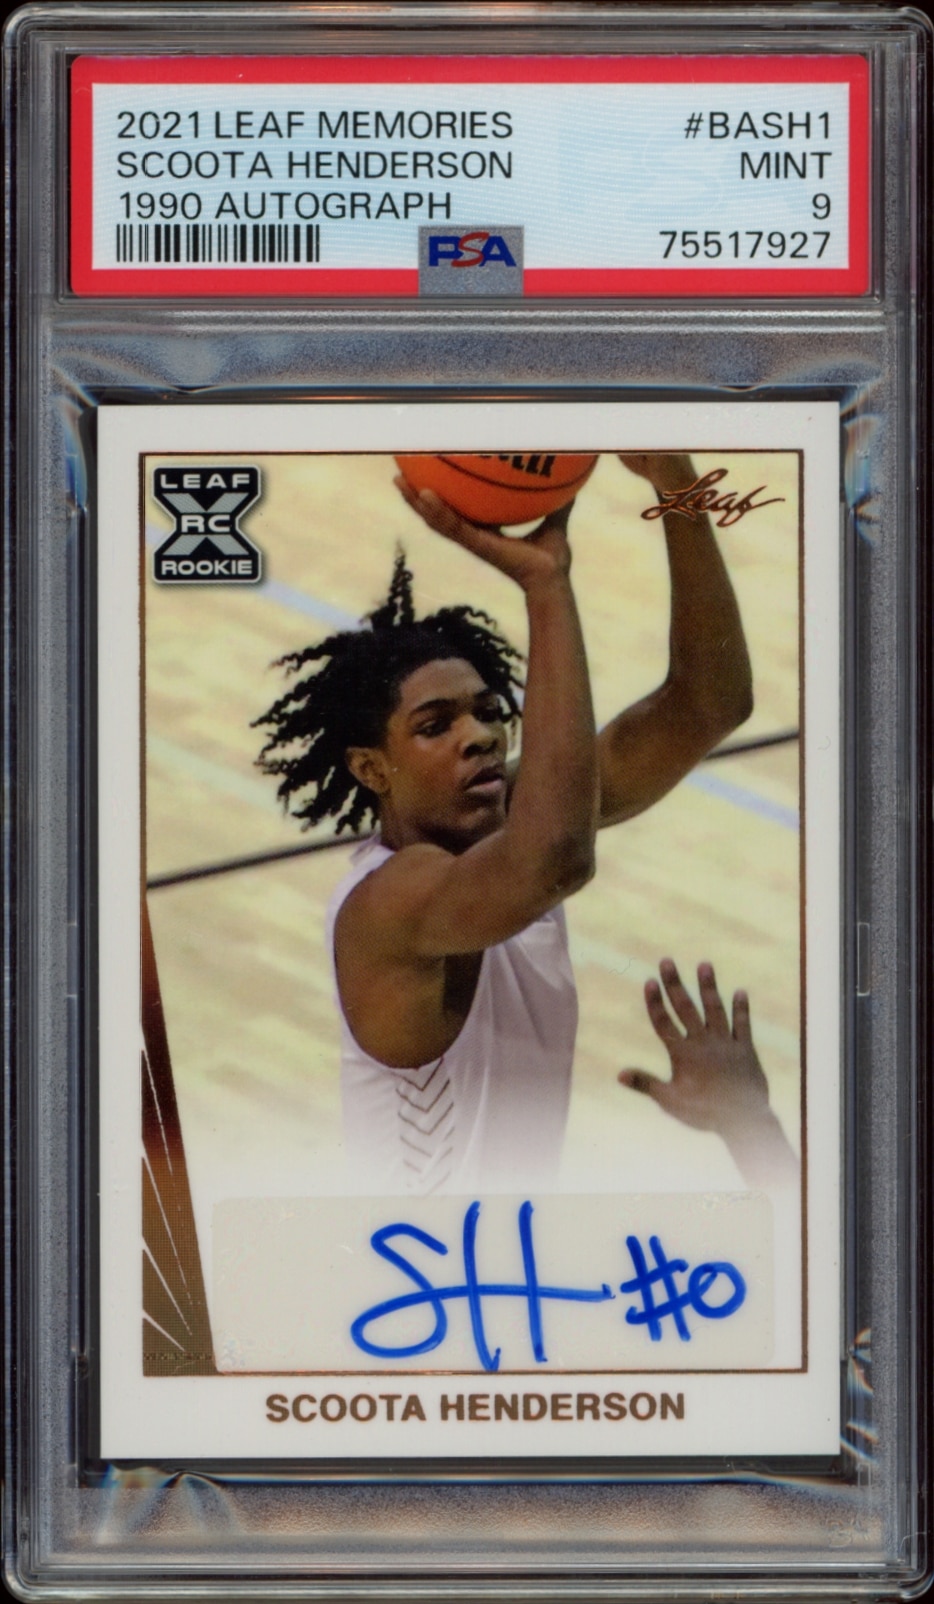 Scoota Hendersons autographed 2021 Leaf Memories Basketball card in mint condition.